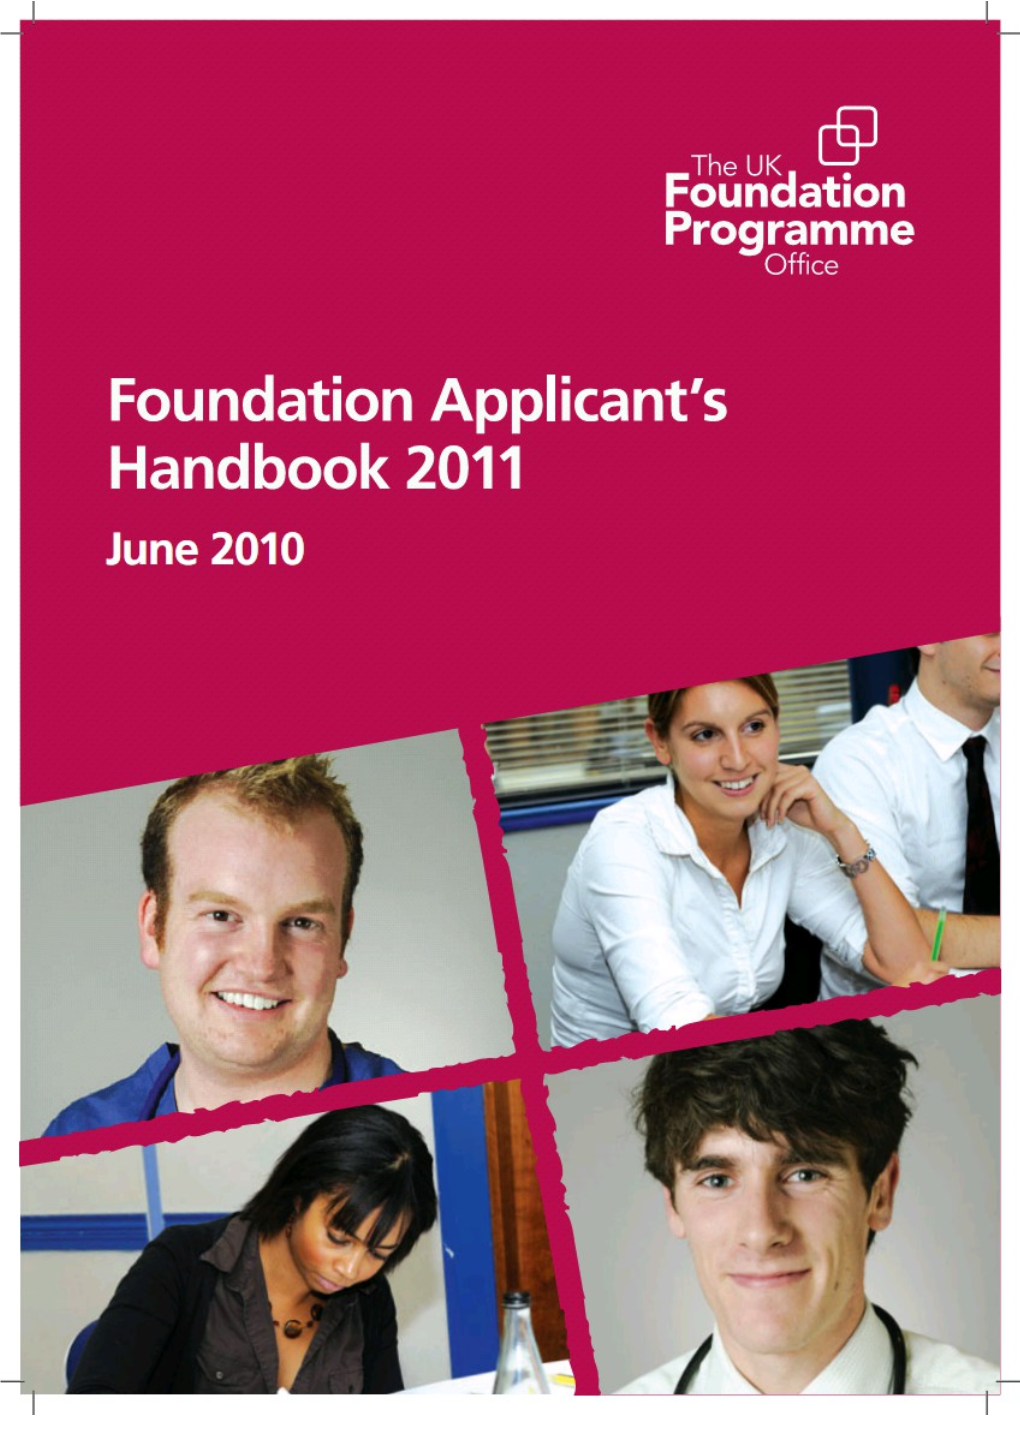 Guidelines for Applicants to the 2008 Foundation Programme